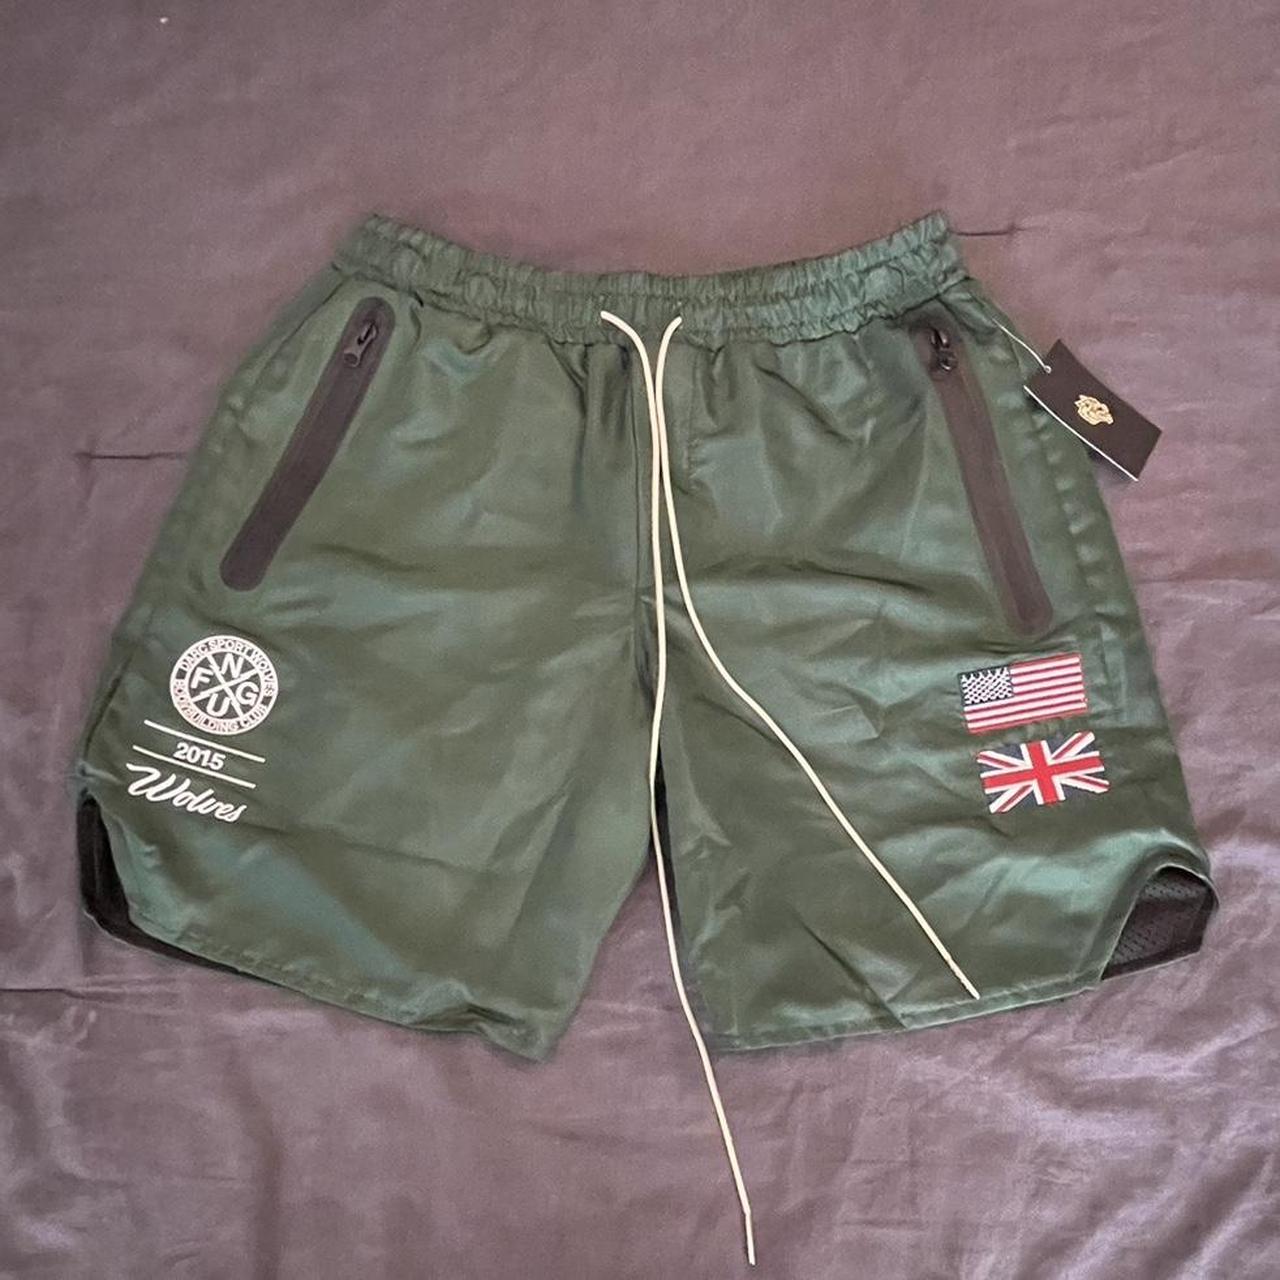 Darc Sport shorts. BRAND NEW W TAGS. From the latest...